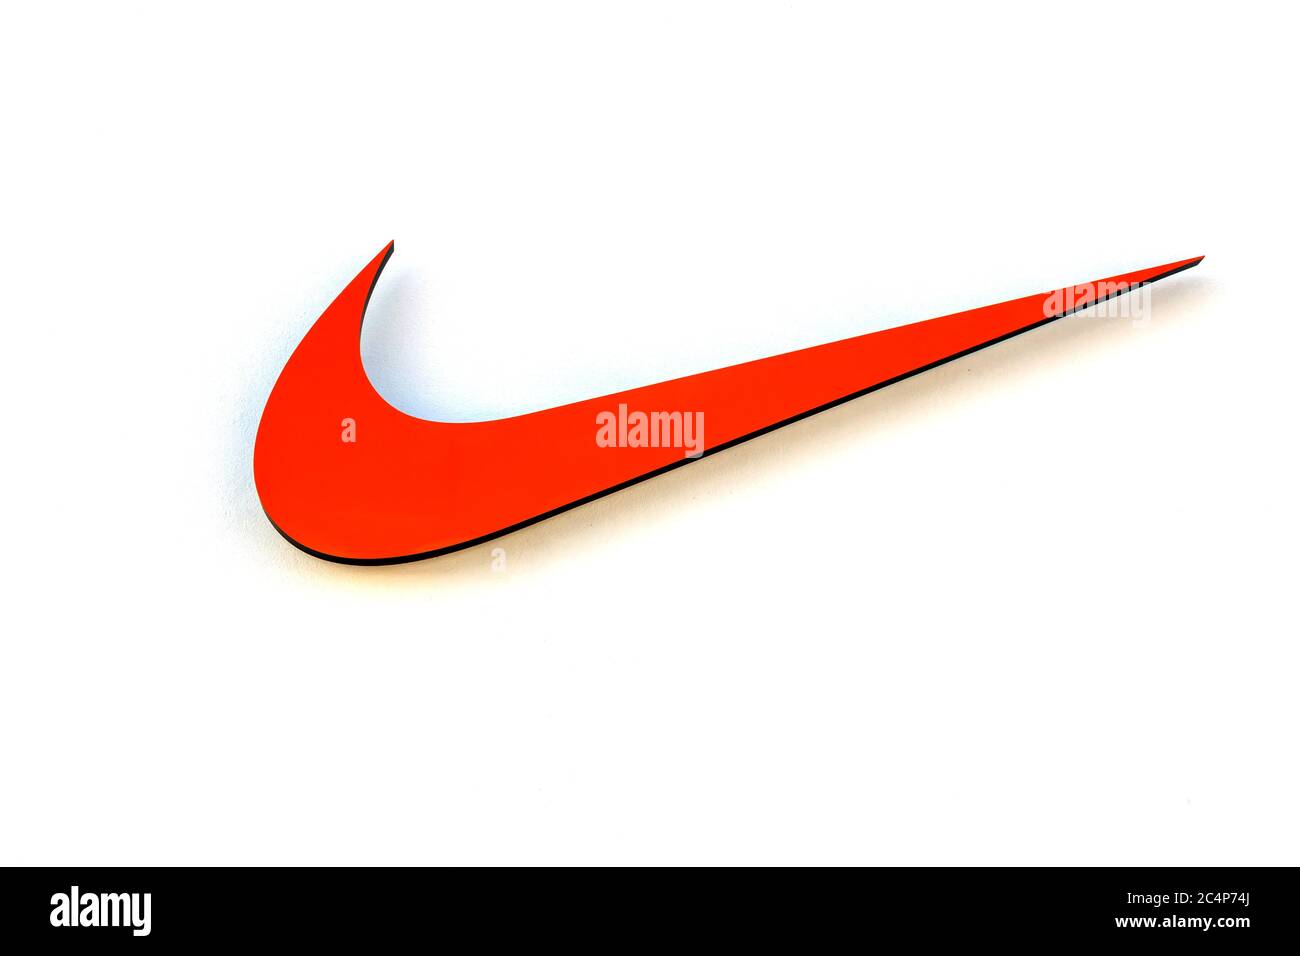 Nike logo Cut Out Stock Images & Pictures - Alamy